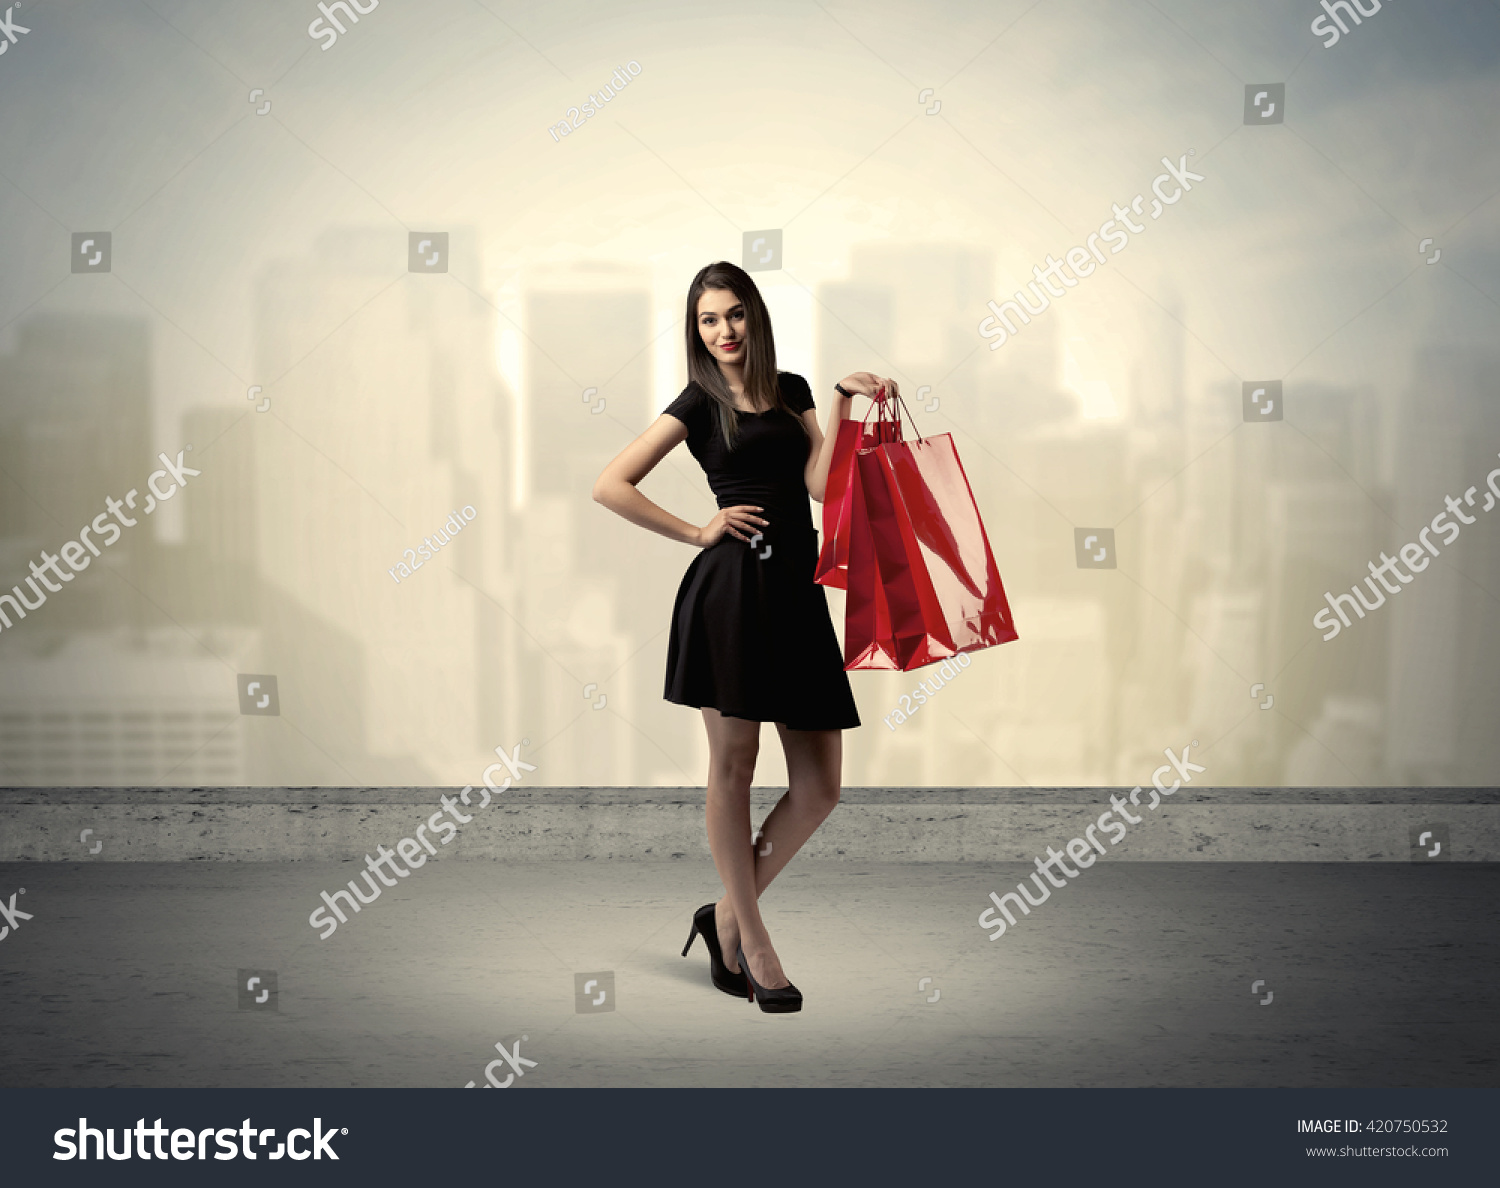 Attractive lady in black holding red shopping bags standing in front o urban landscape with tall buildings concept #420750532